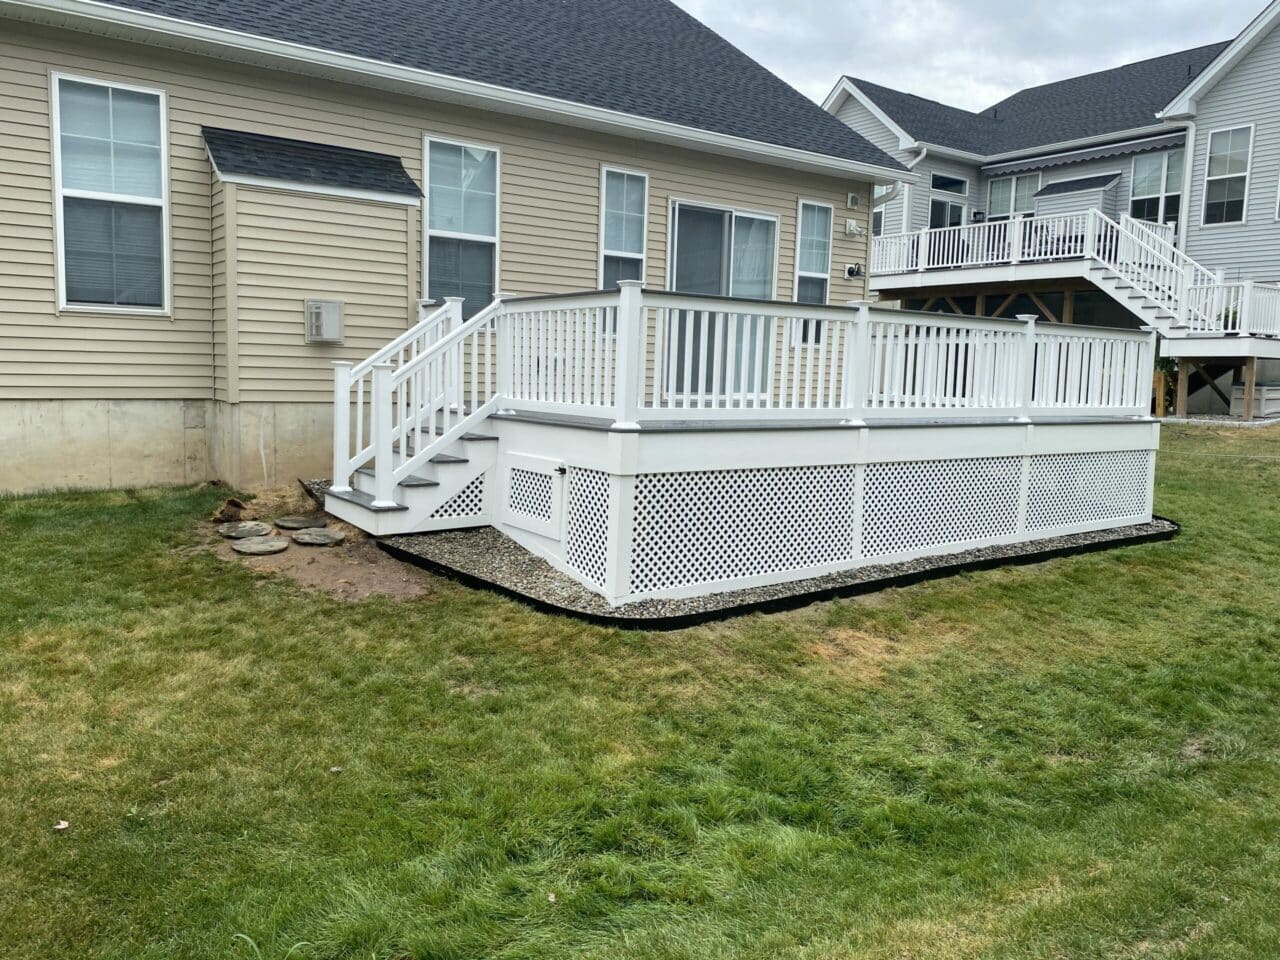 Photo of composite deck with white railing and white lattice work